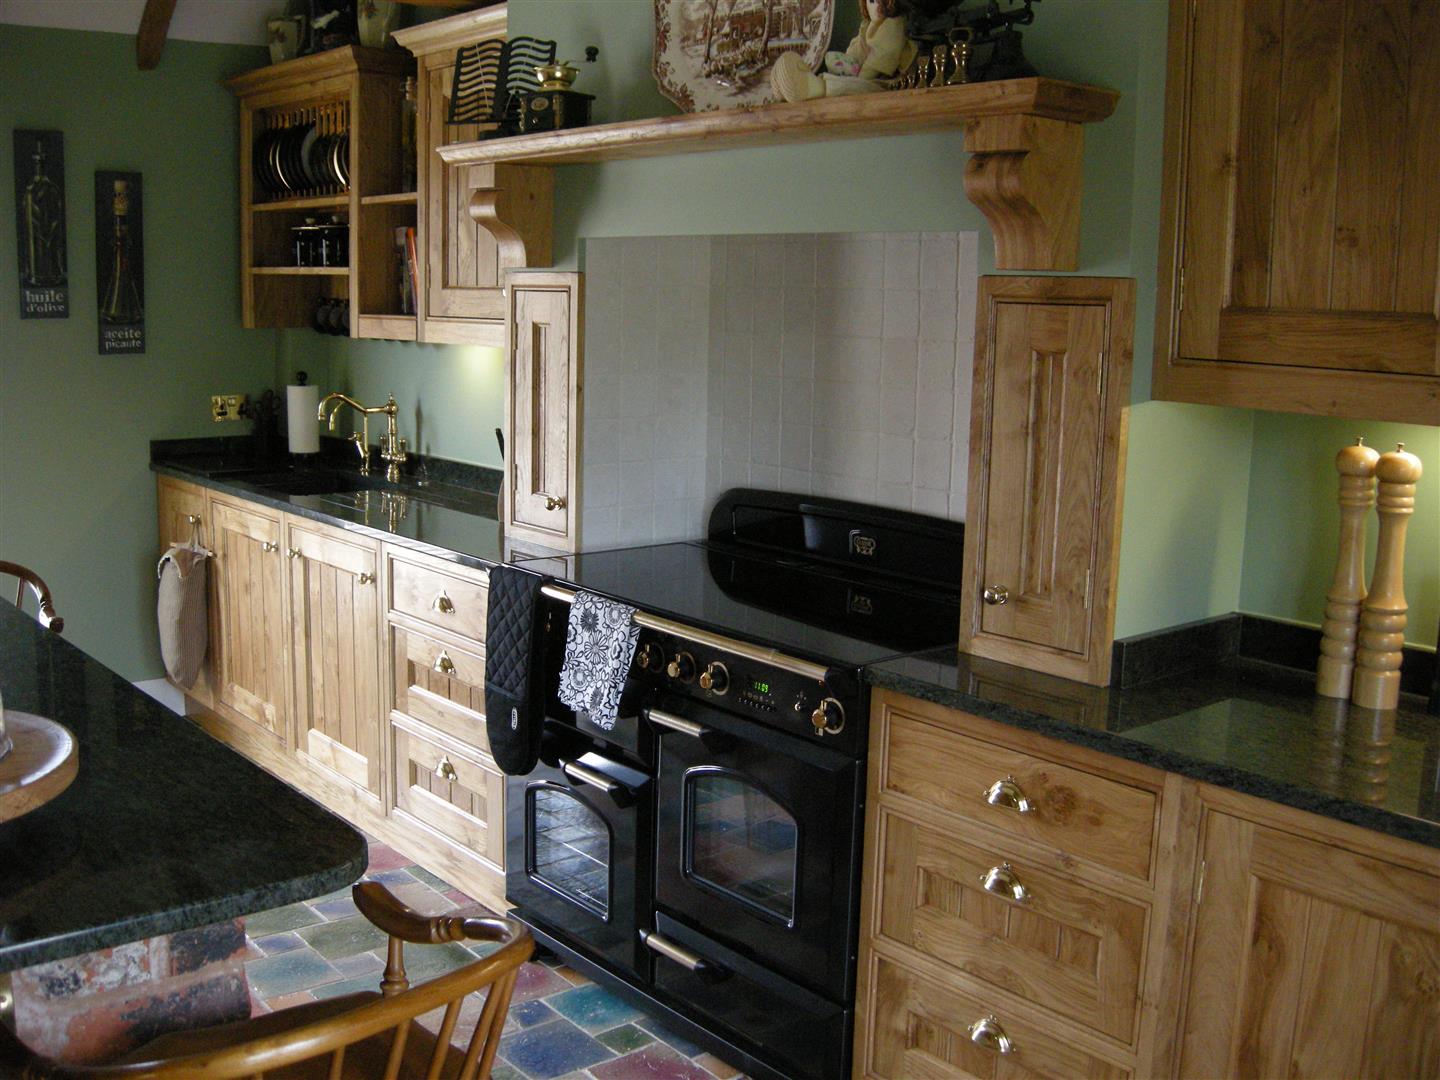 Redbrook kitchens design and install bespoke kitchens in Gloucestershire. Poppy oak front framed kitchen with toungue and groove centre panels in traditional style